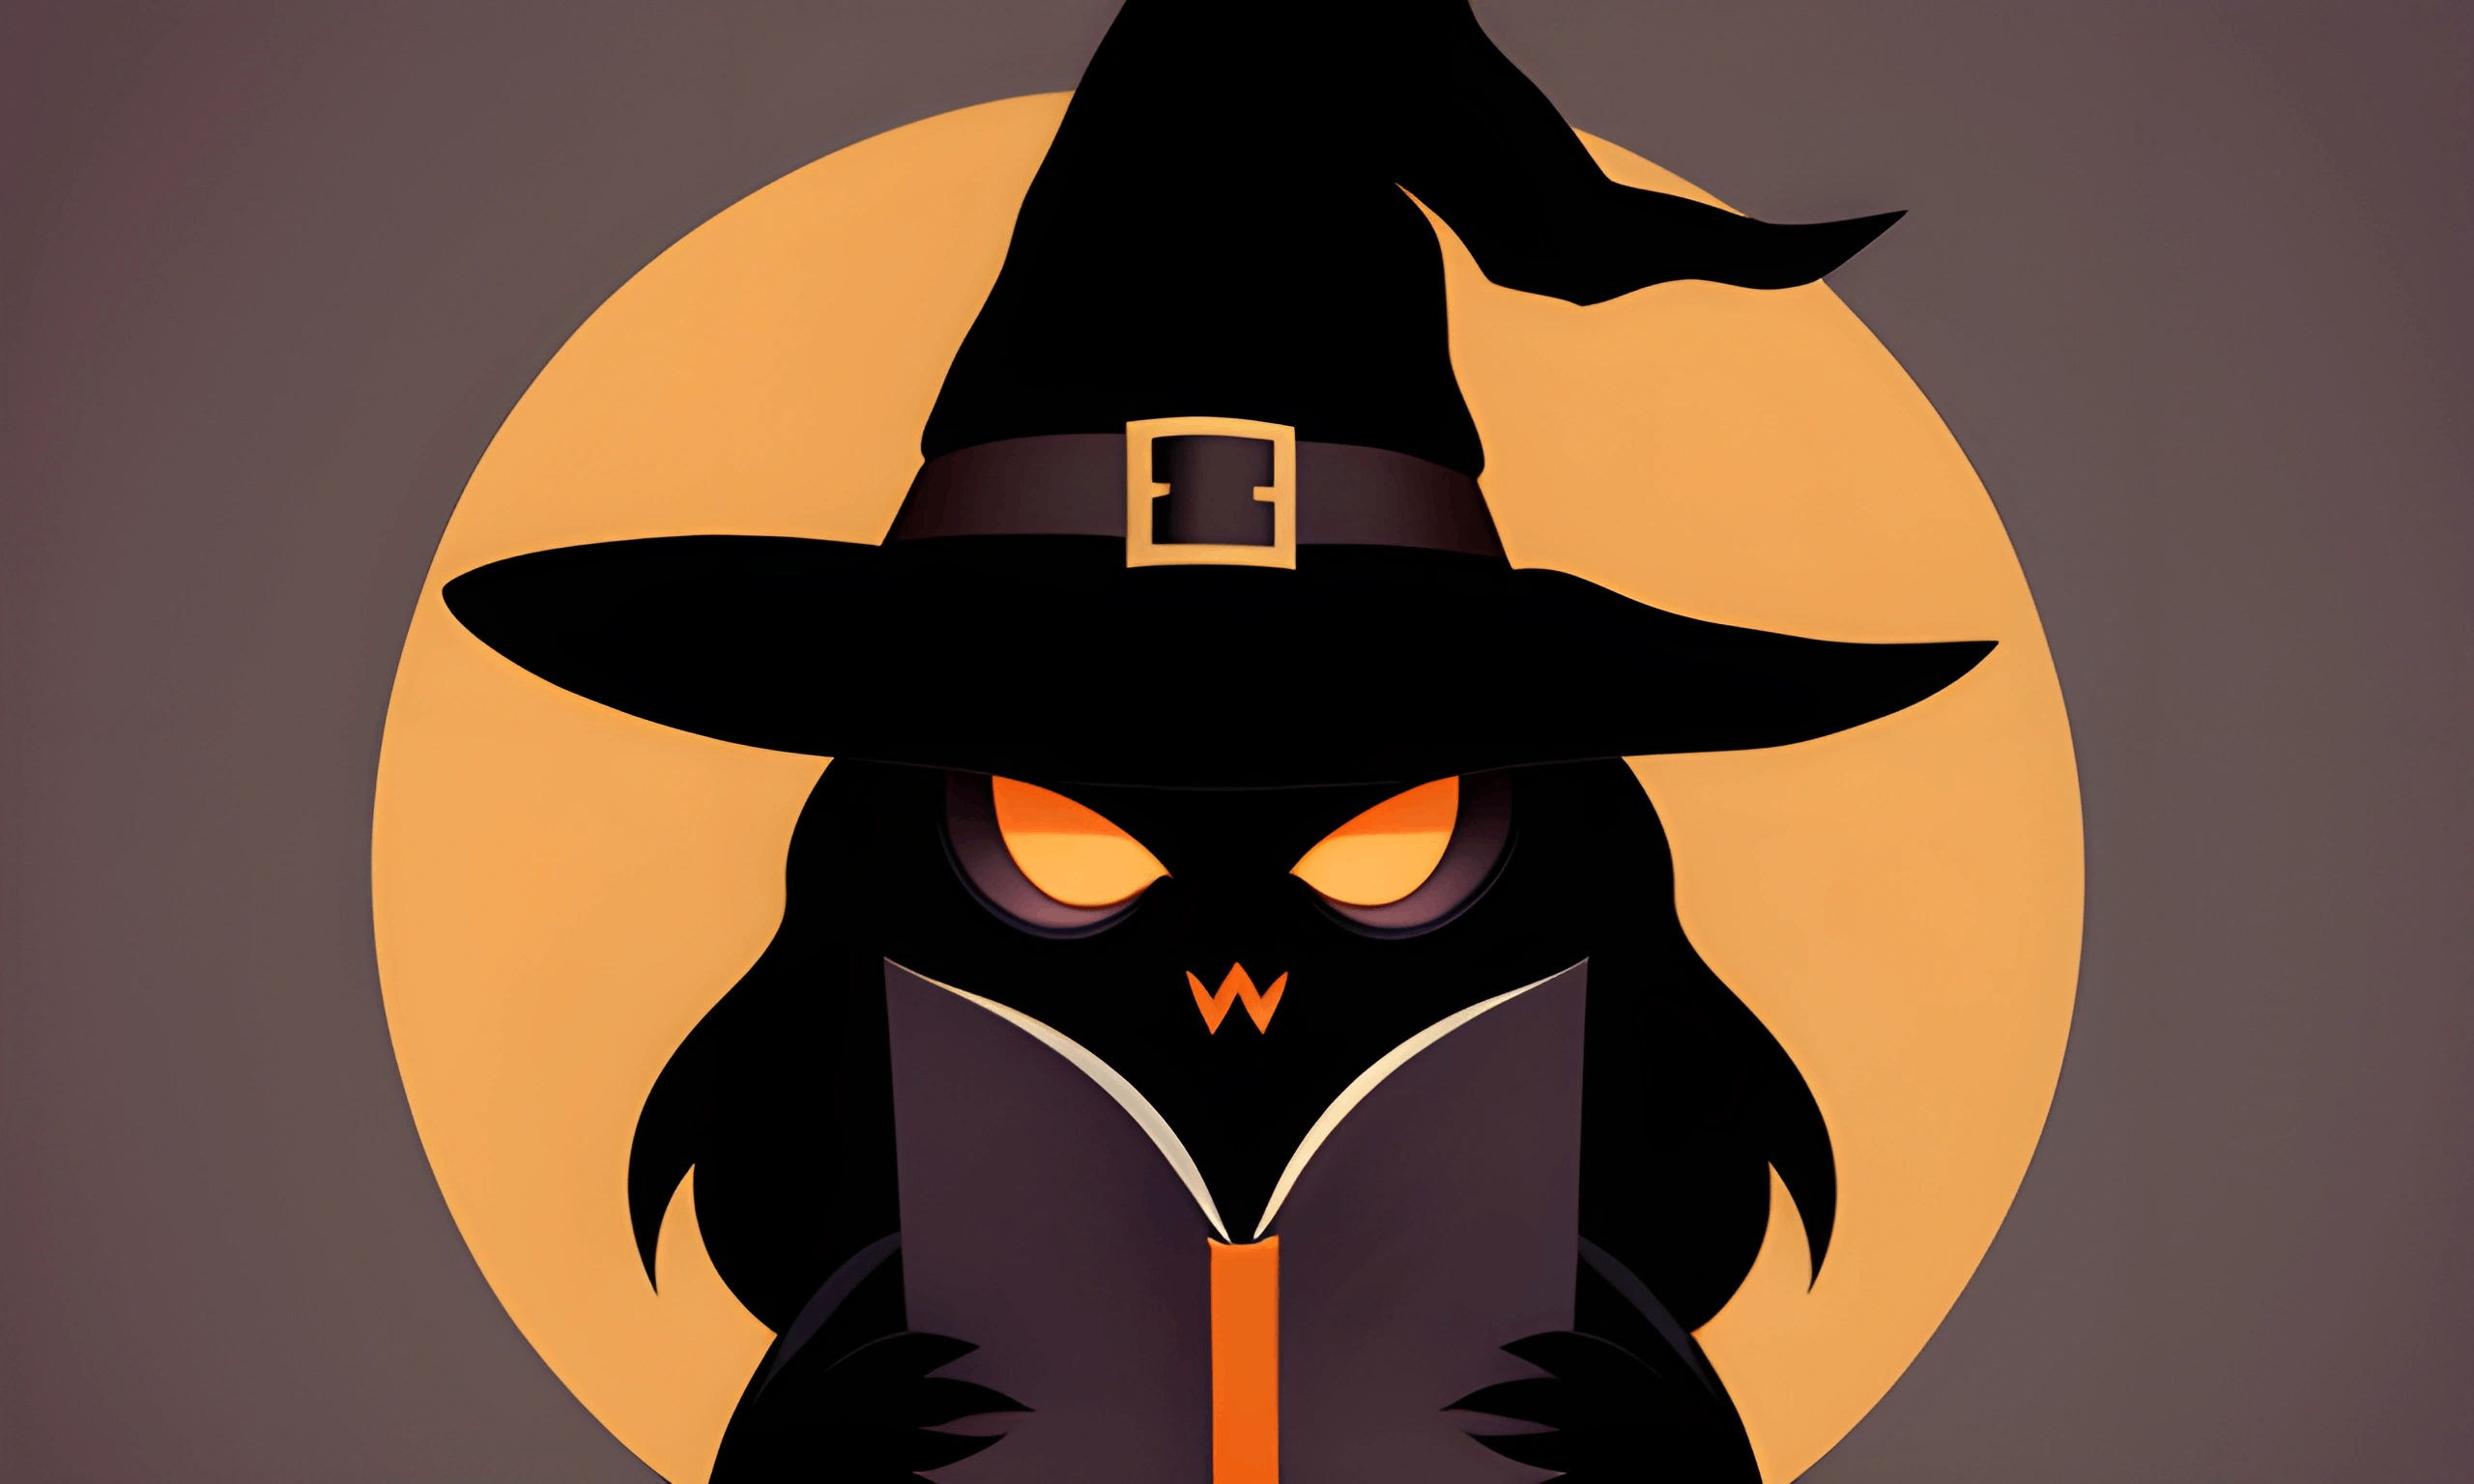 witch owl with a hat and a book in front of a full moon